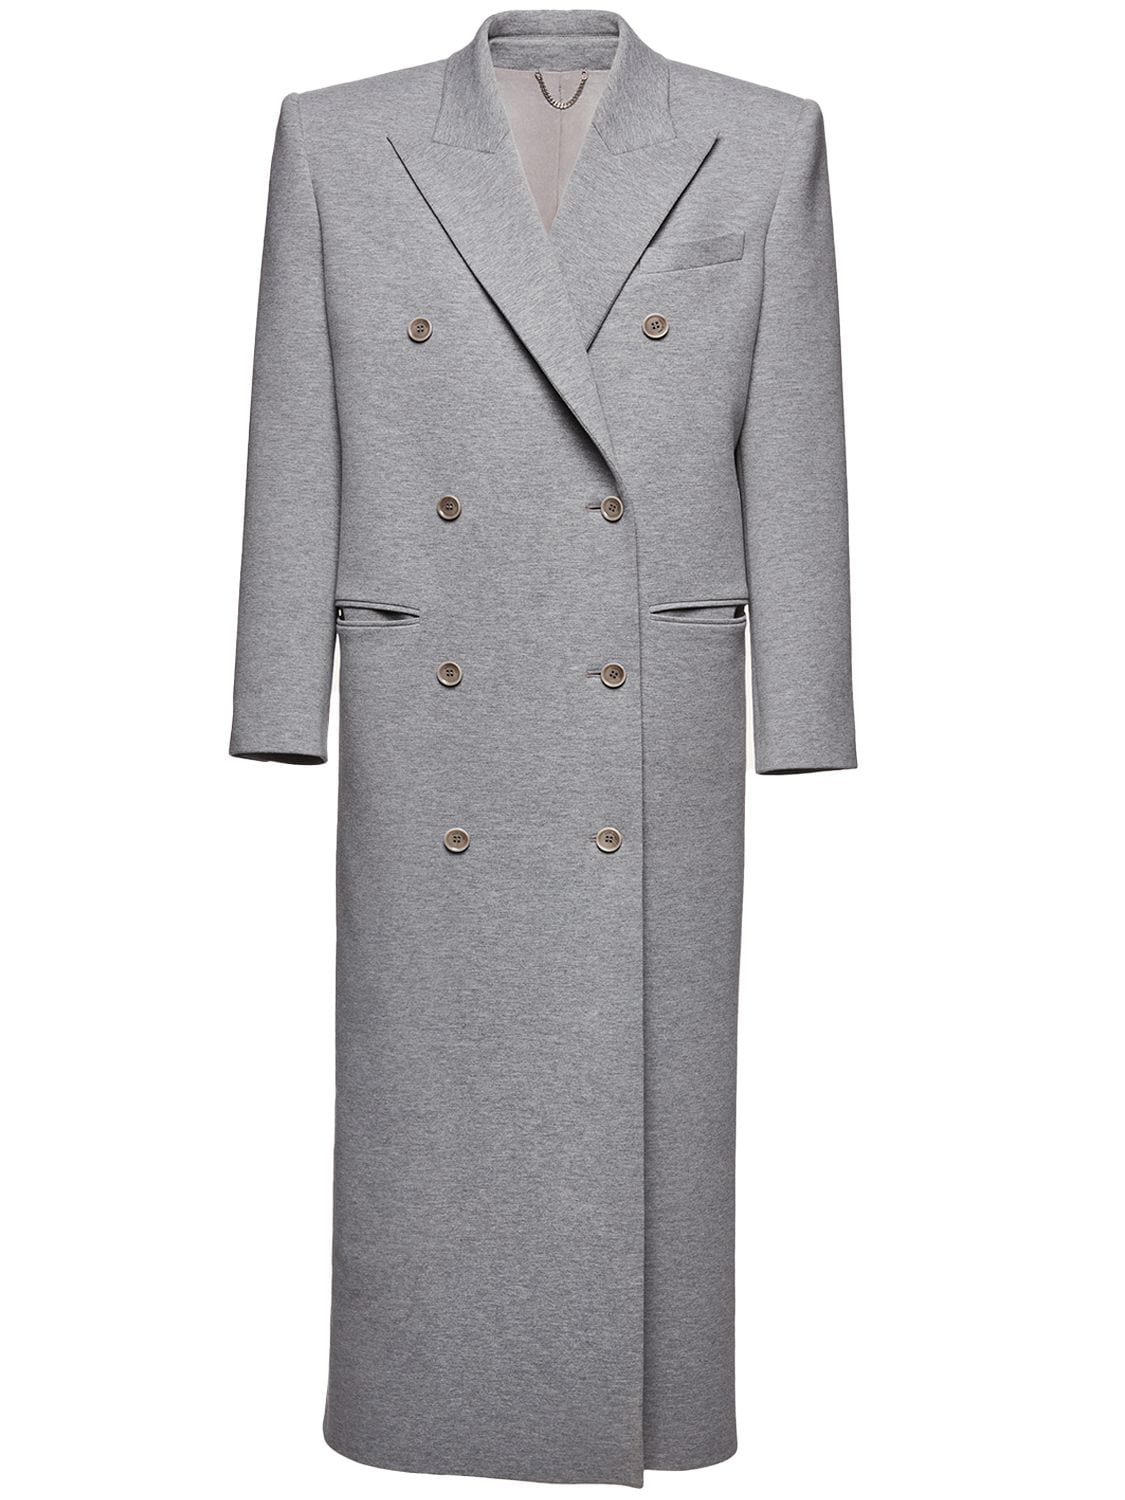 MAGDA BUTRYM COTTON BLEND DOUBLE BREASTED LONG COAT